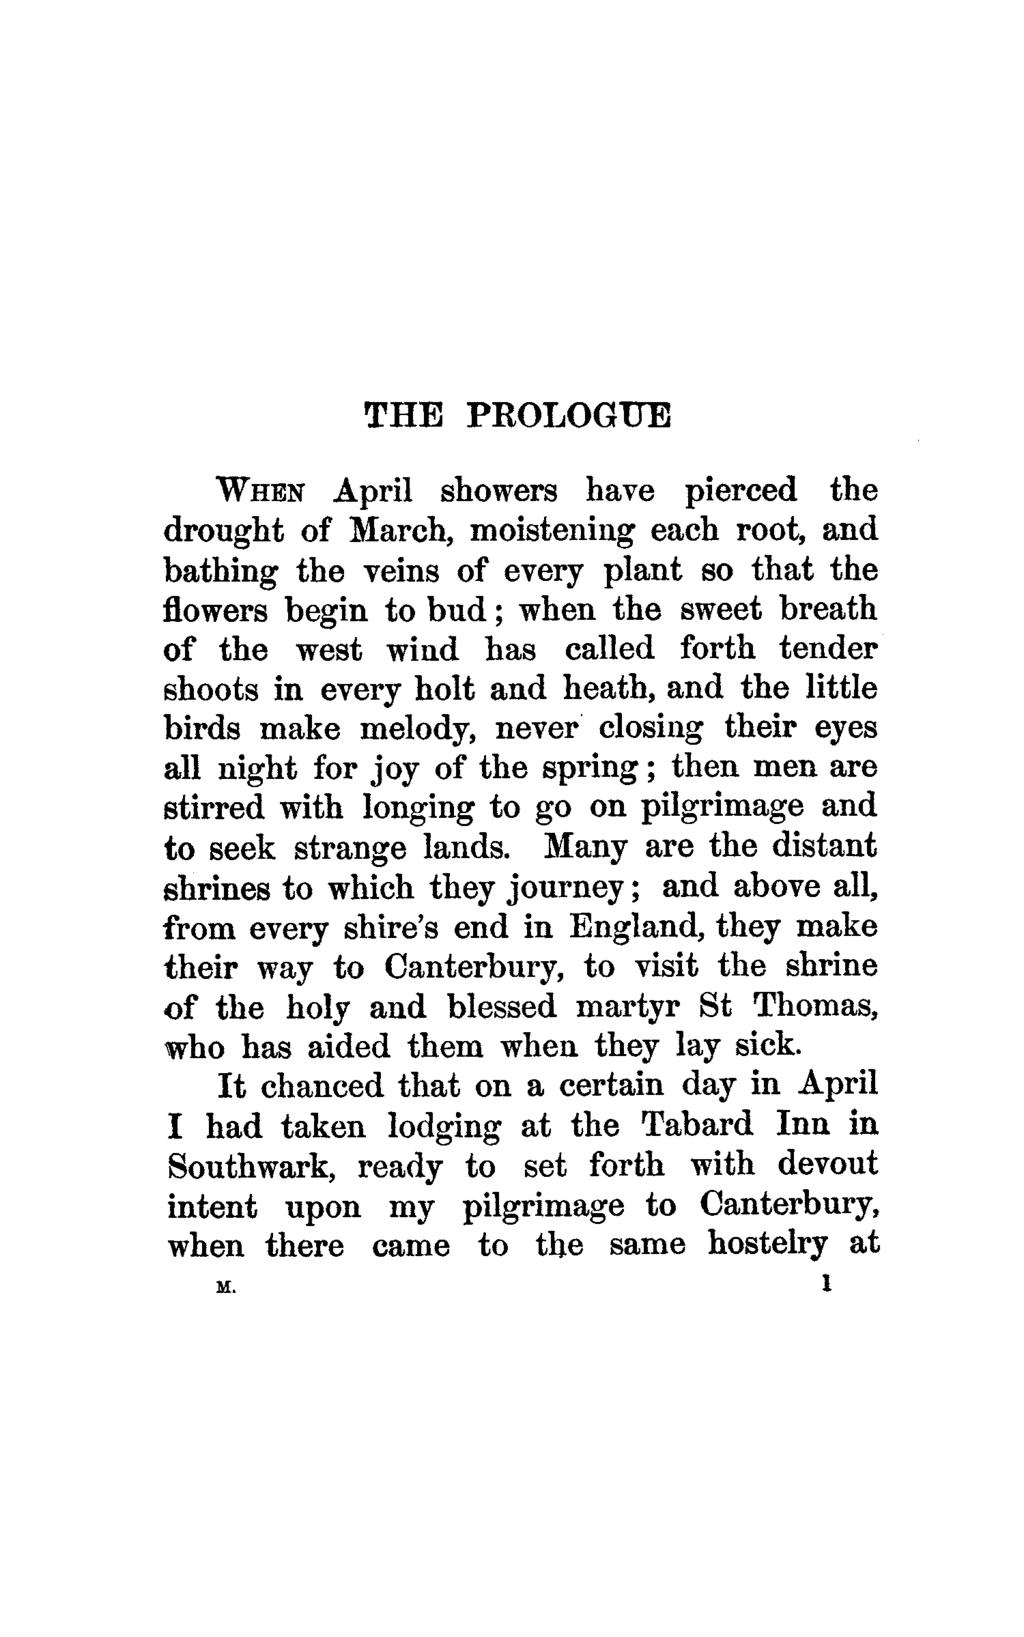 THE PROLOGUE WHEN April showers have pierced the drought of March, moistening each root, and bathing the veins of every plant so that the flowers begin to bud; when the sweet breath of the west wind